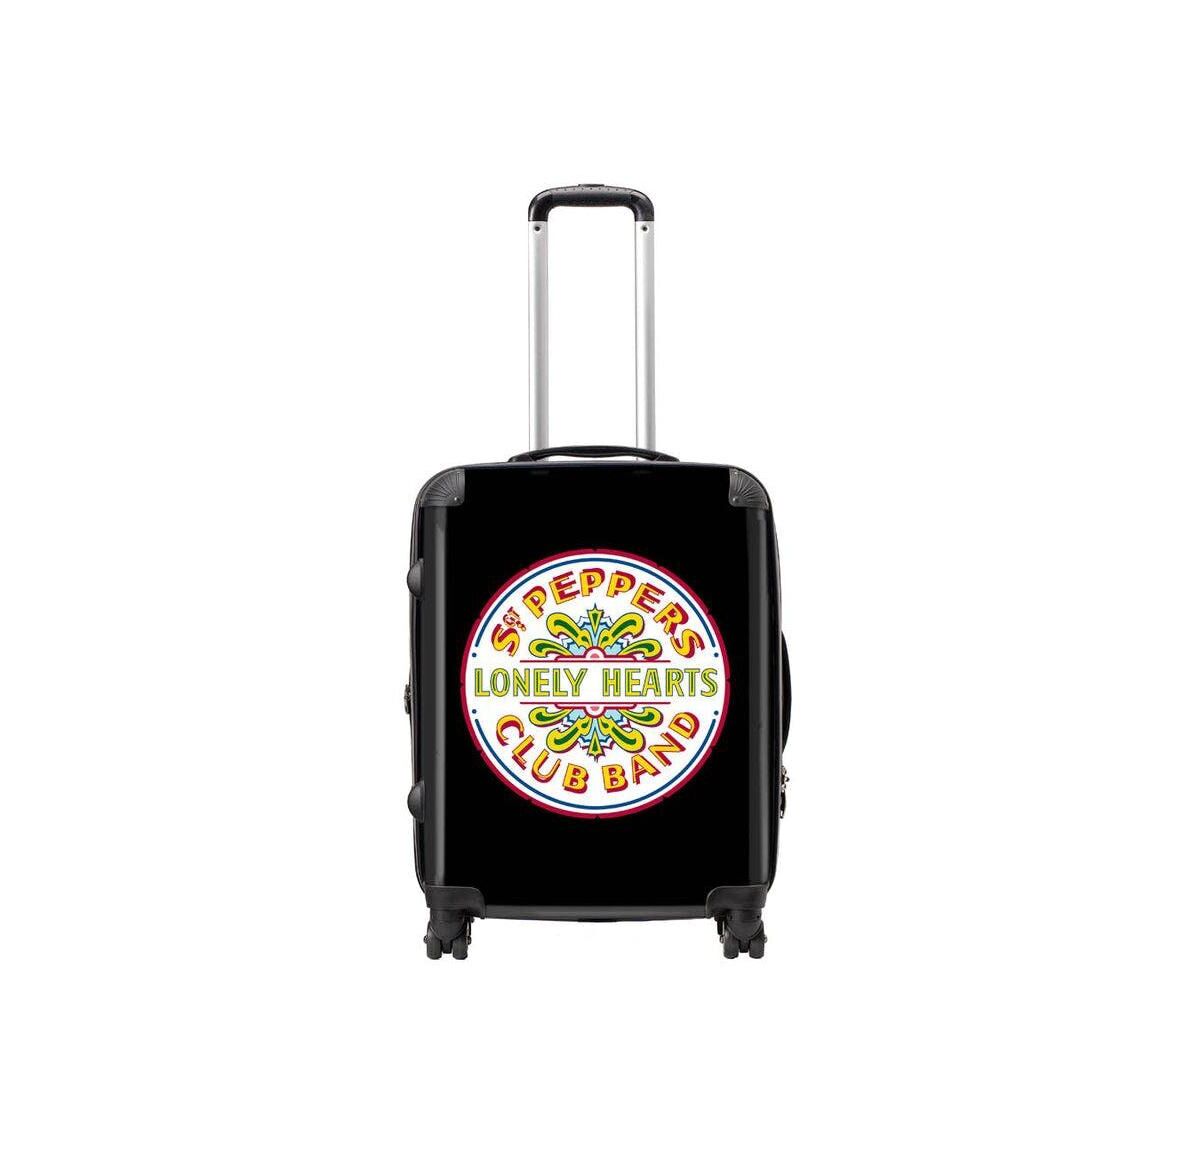 Rocksax The Beatles Tour Series Luggage - Lonely Hearts - Large - Check In - Multi-colored